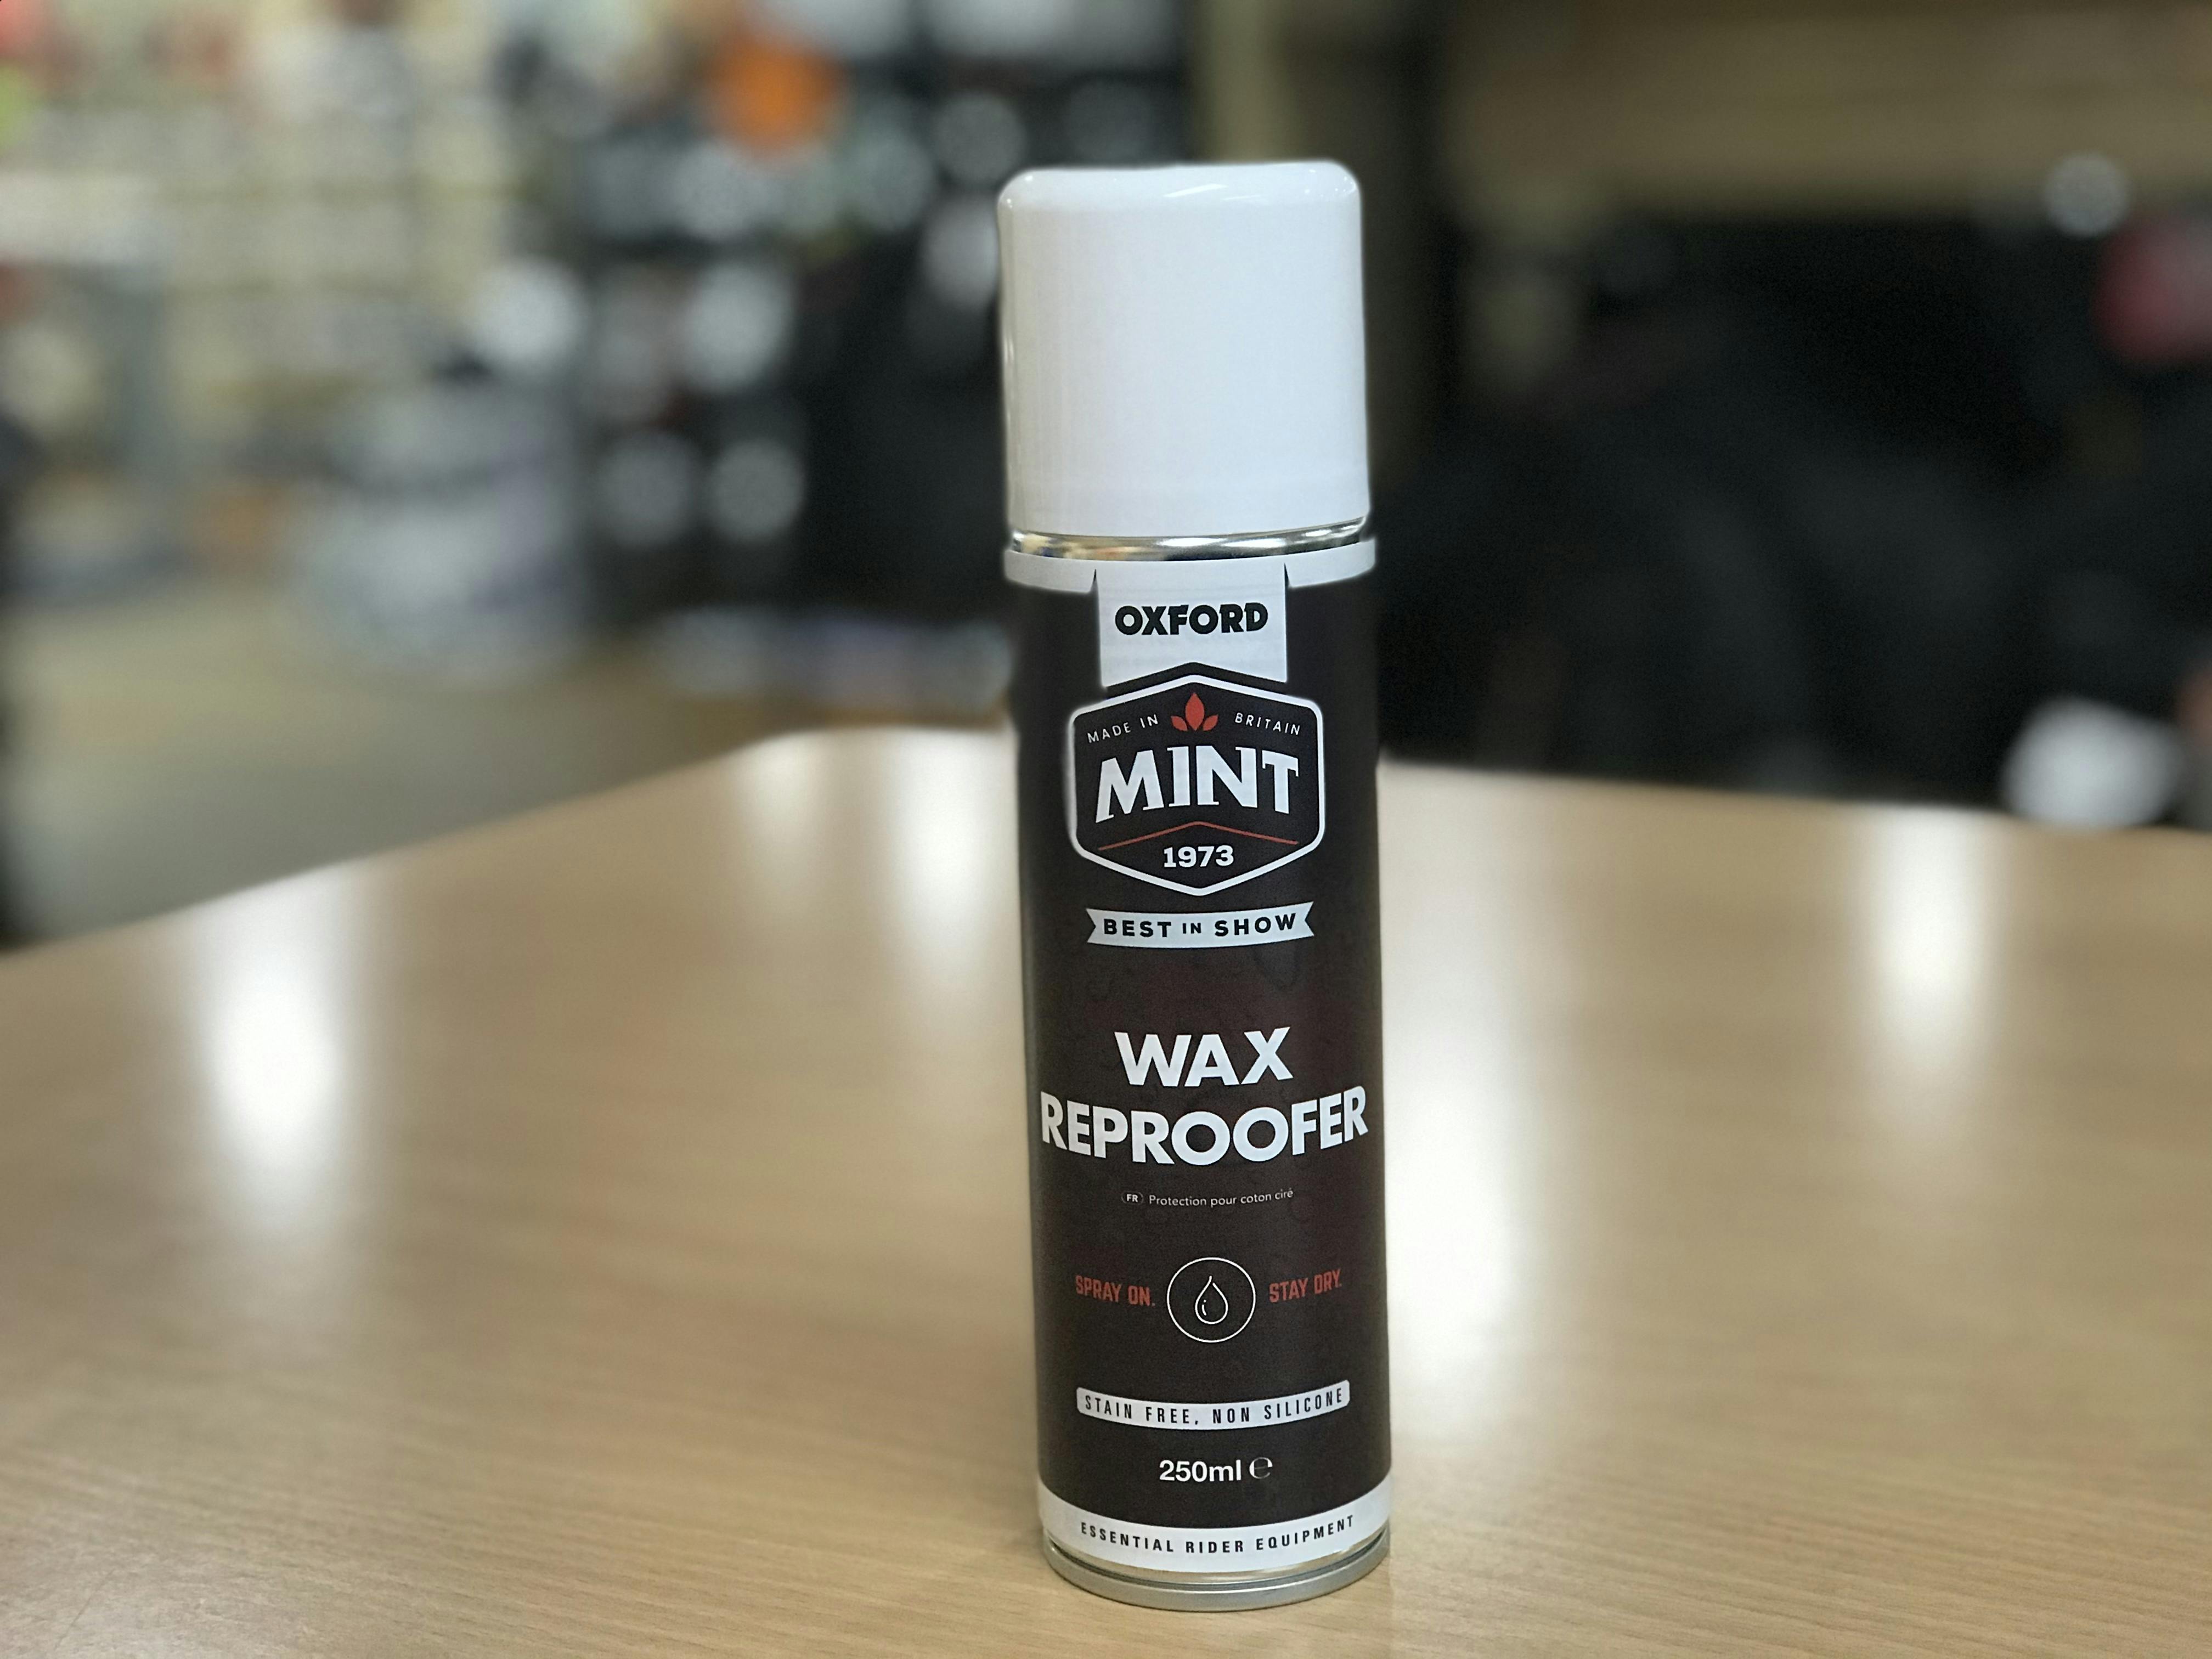 A can of Mint Wax reproofed spray